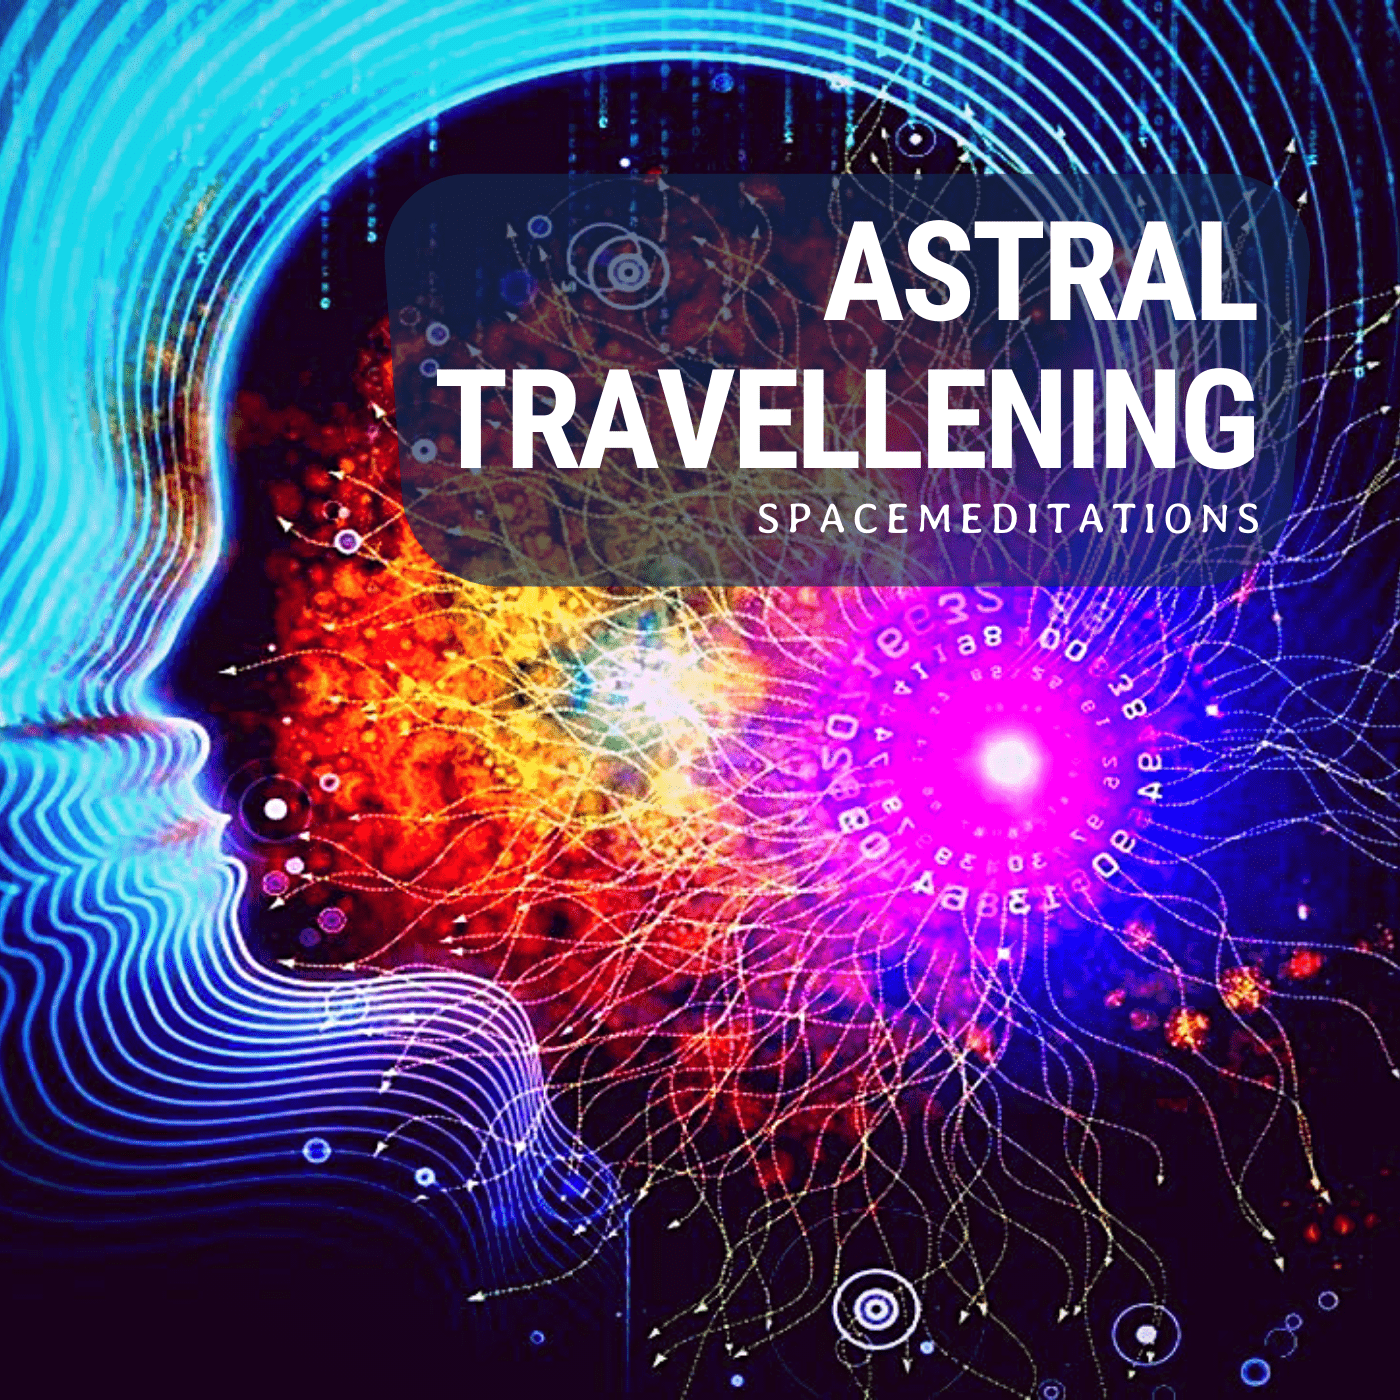 Astral Travellening. Spacemeditations